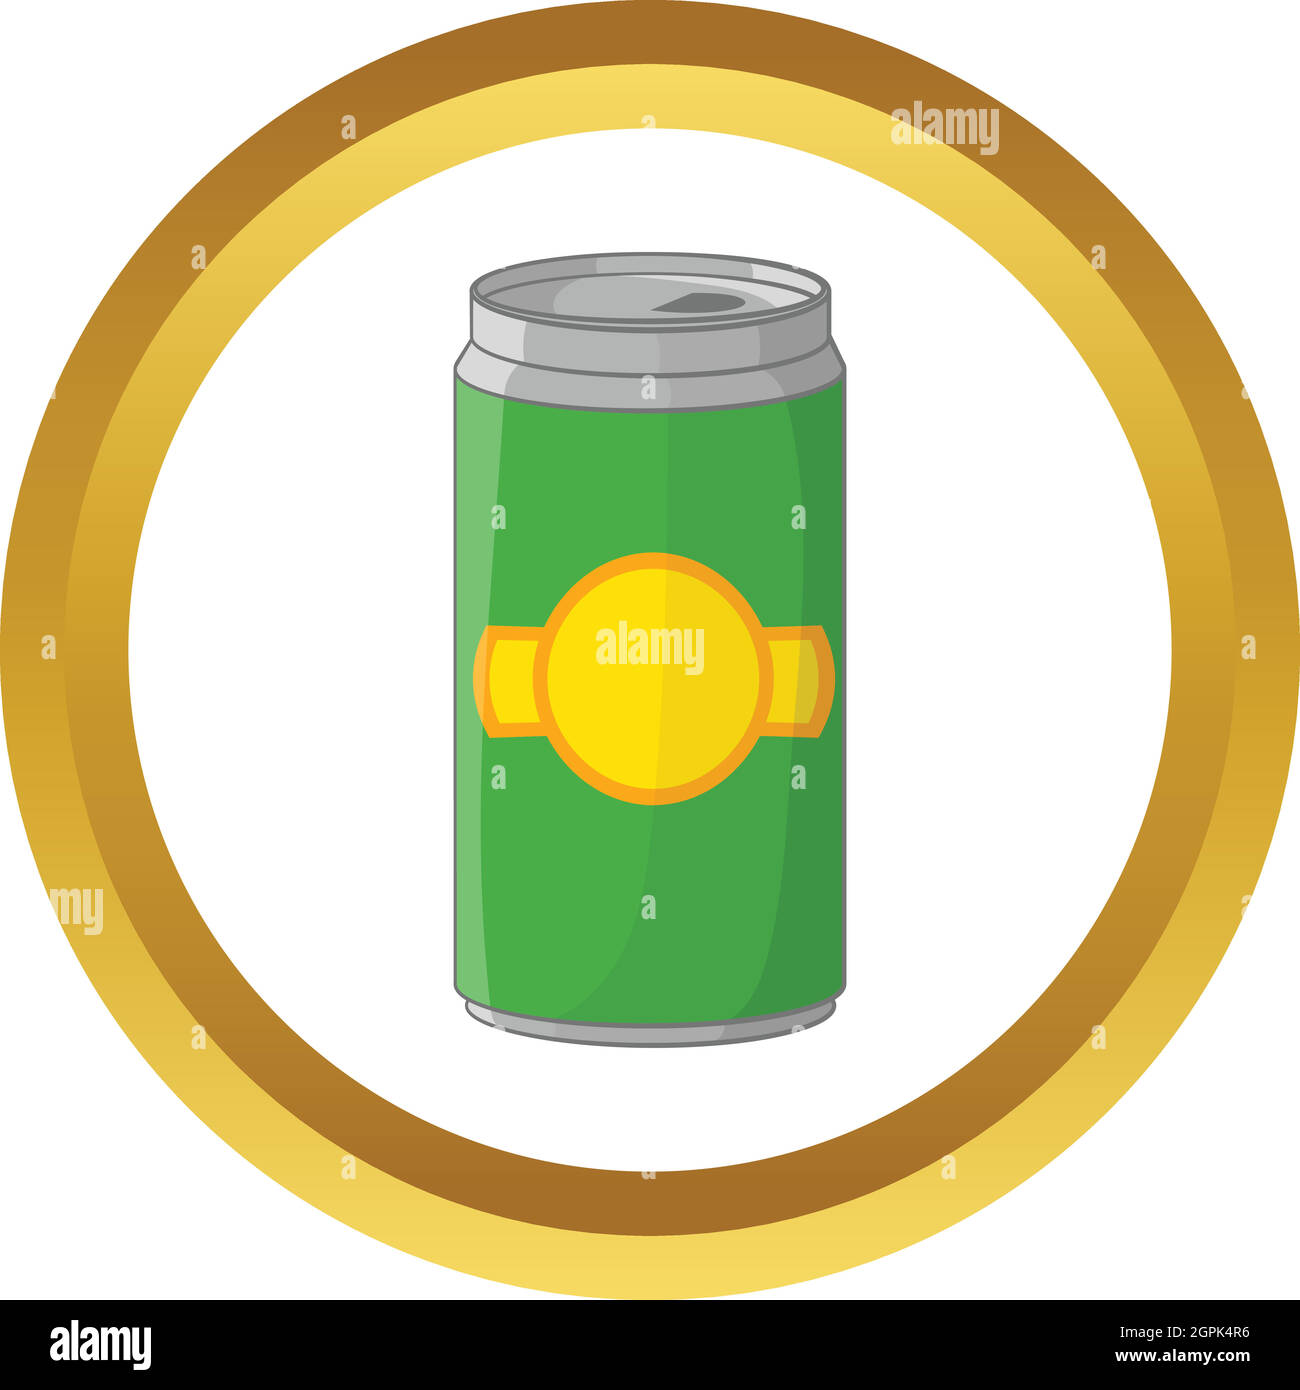 Aluminum cans for beer vector icon Stock Vector